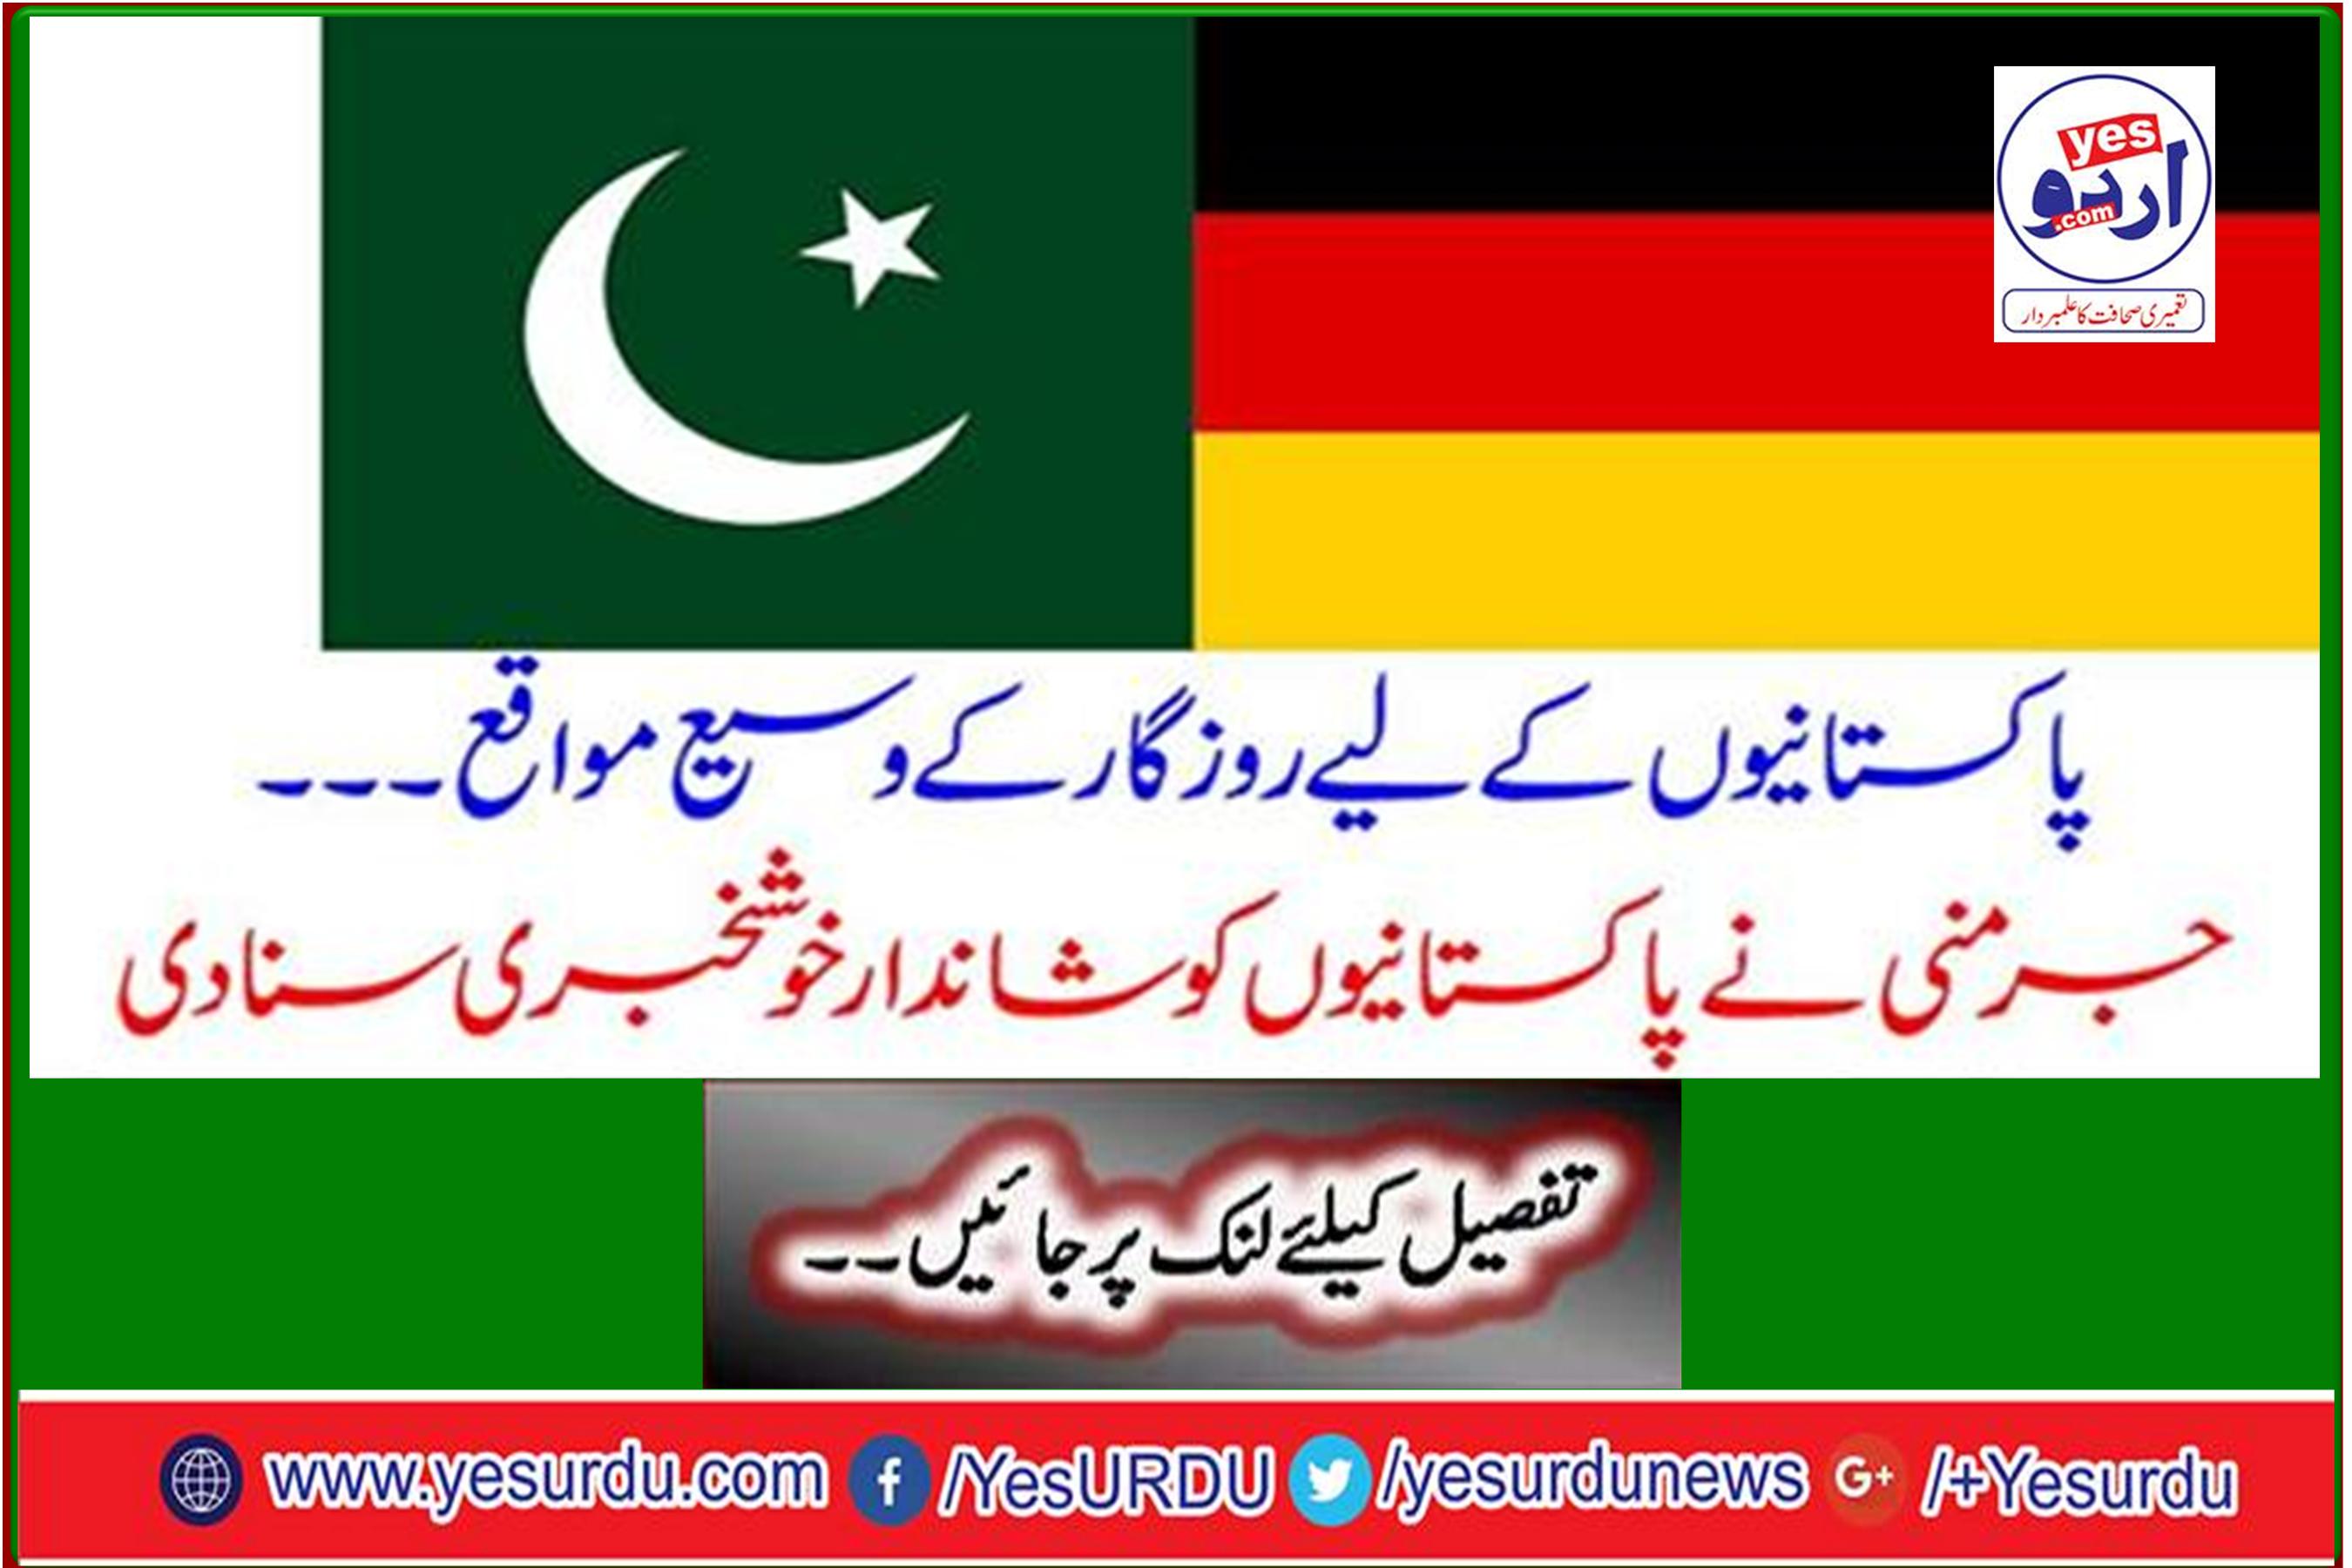 Great job opportunities for Pakistanis ... Germany preached the good news to Pakistanis